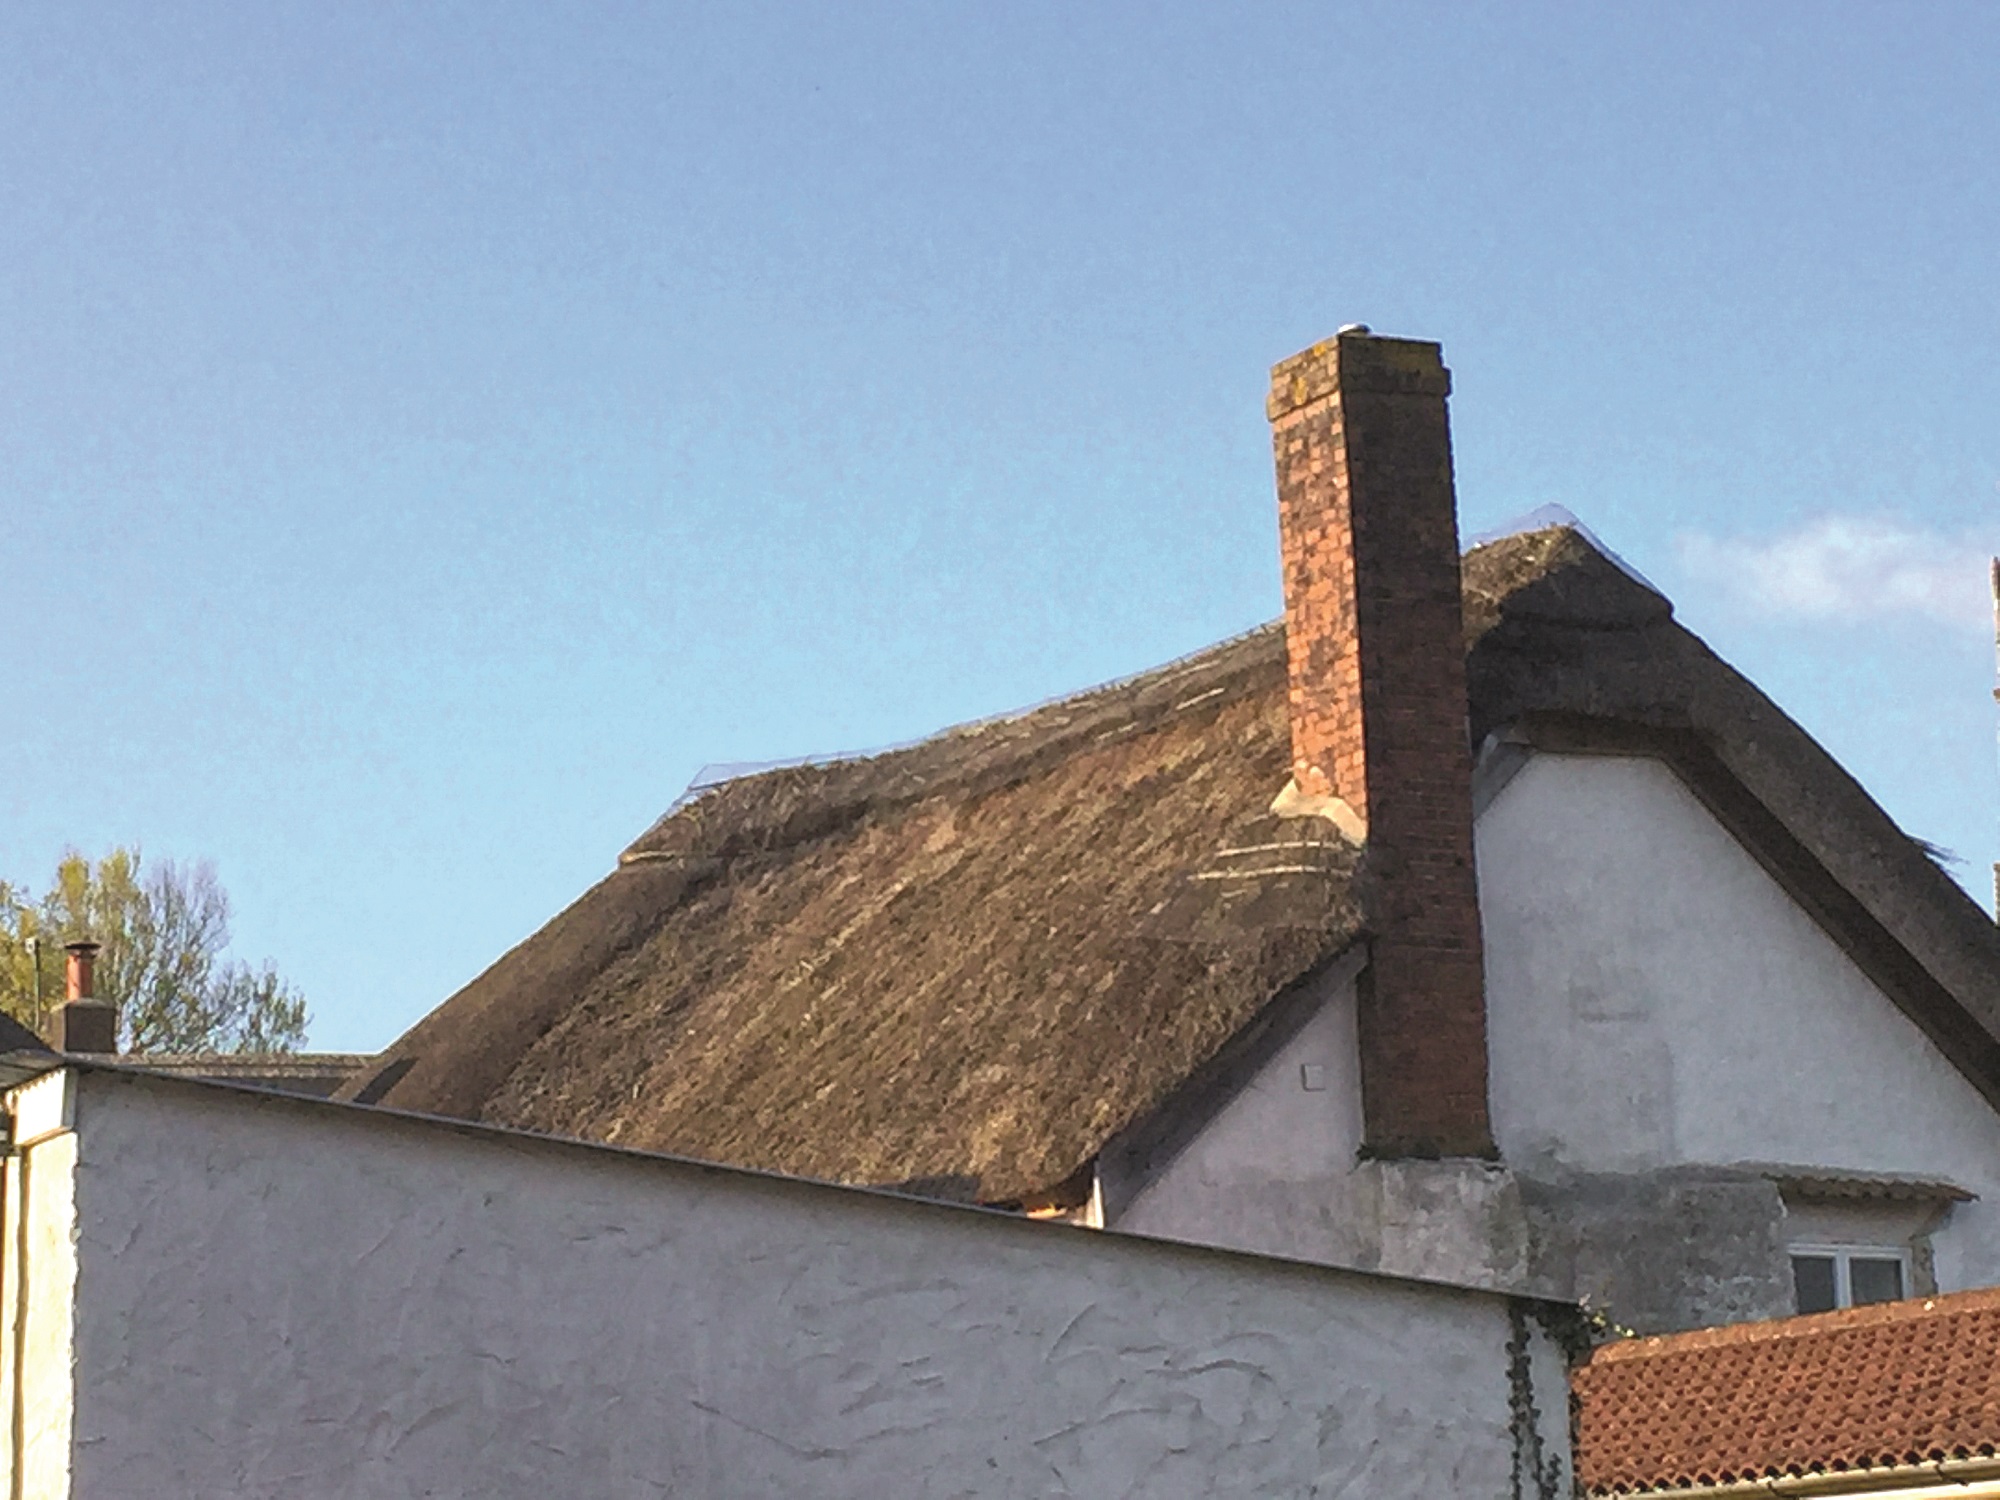 Period home with old thatch roof